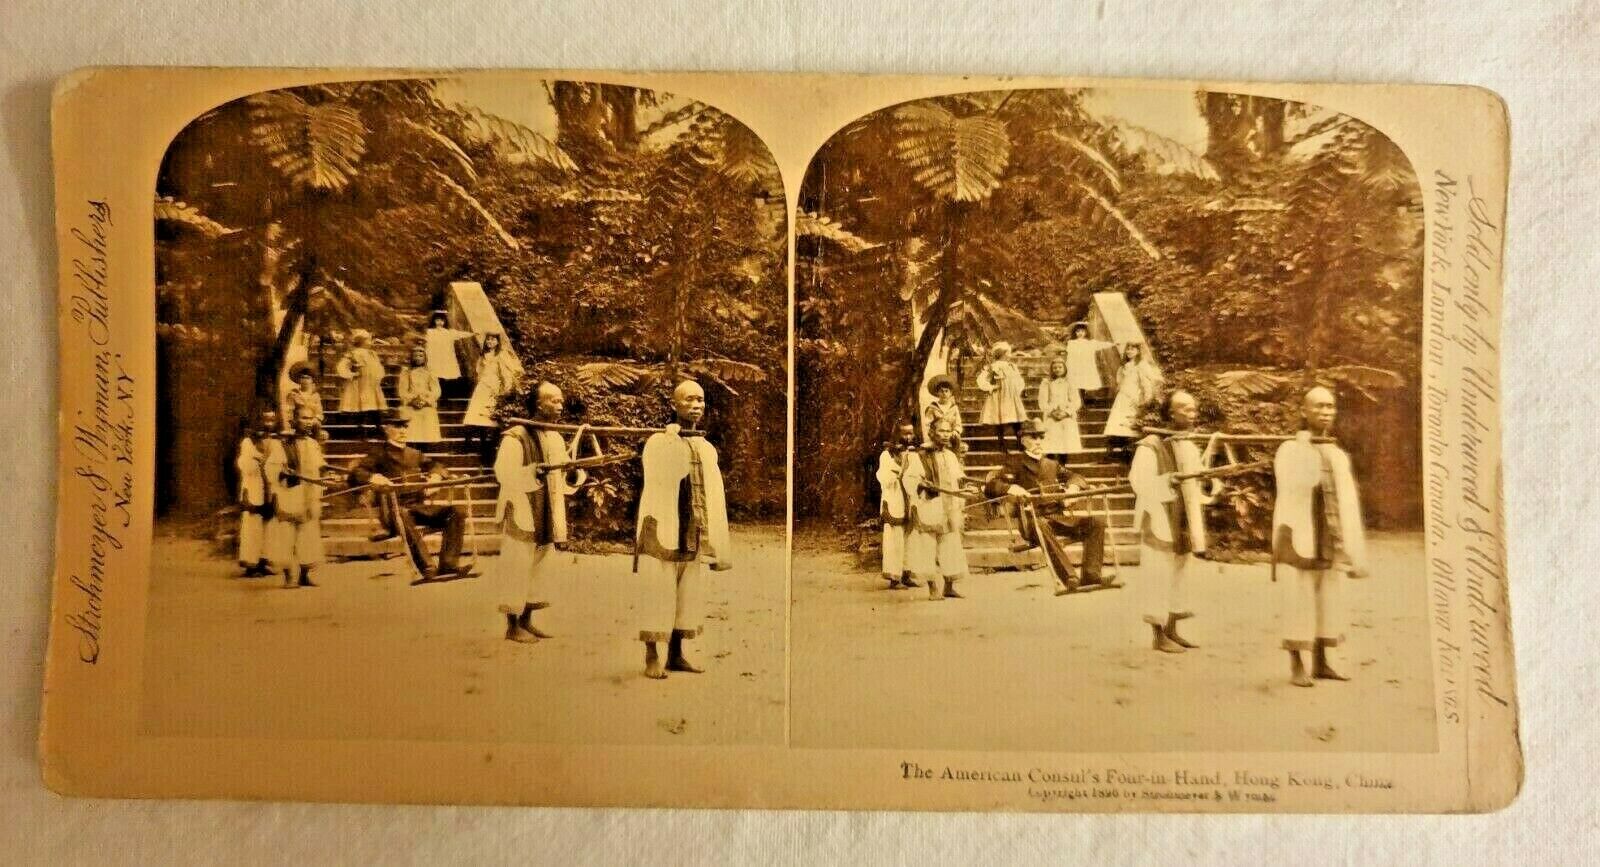 The American Consul\'s Four-in Hand Hong Kong China Stereoview 1896 Strohmeyer NY